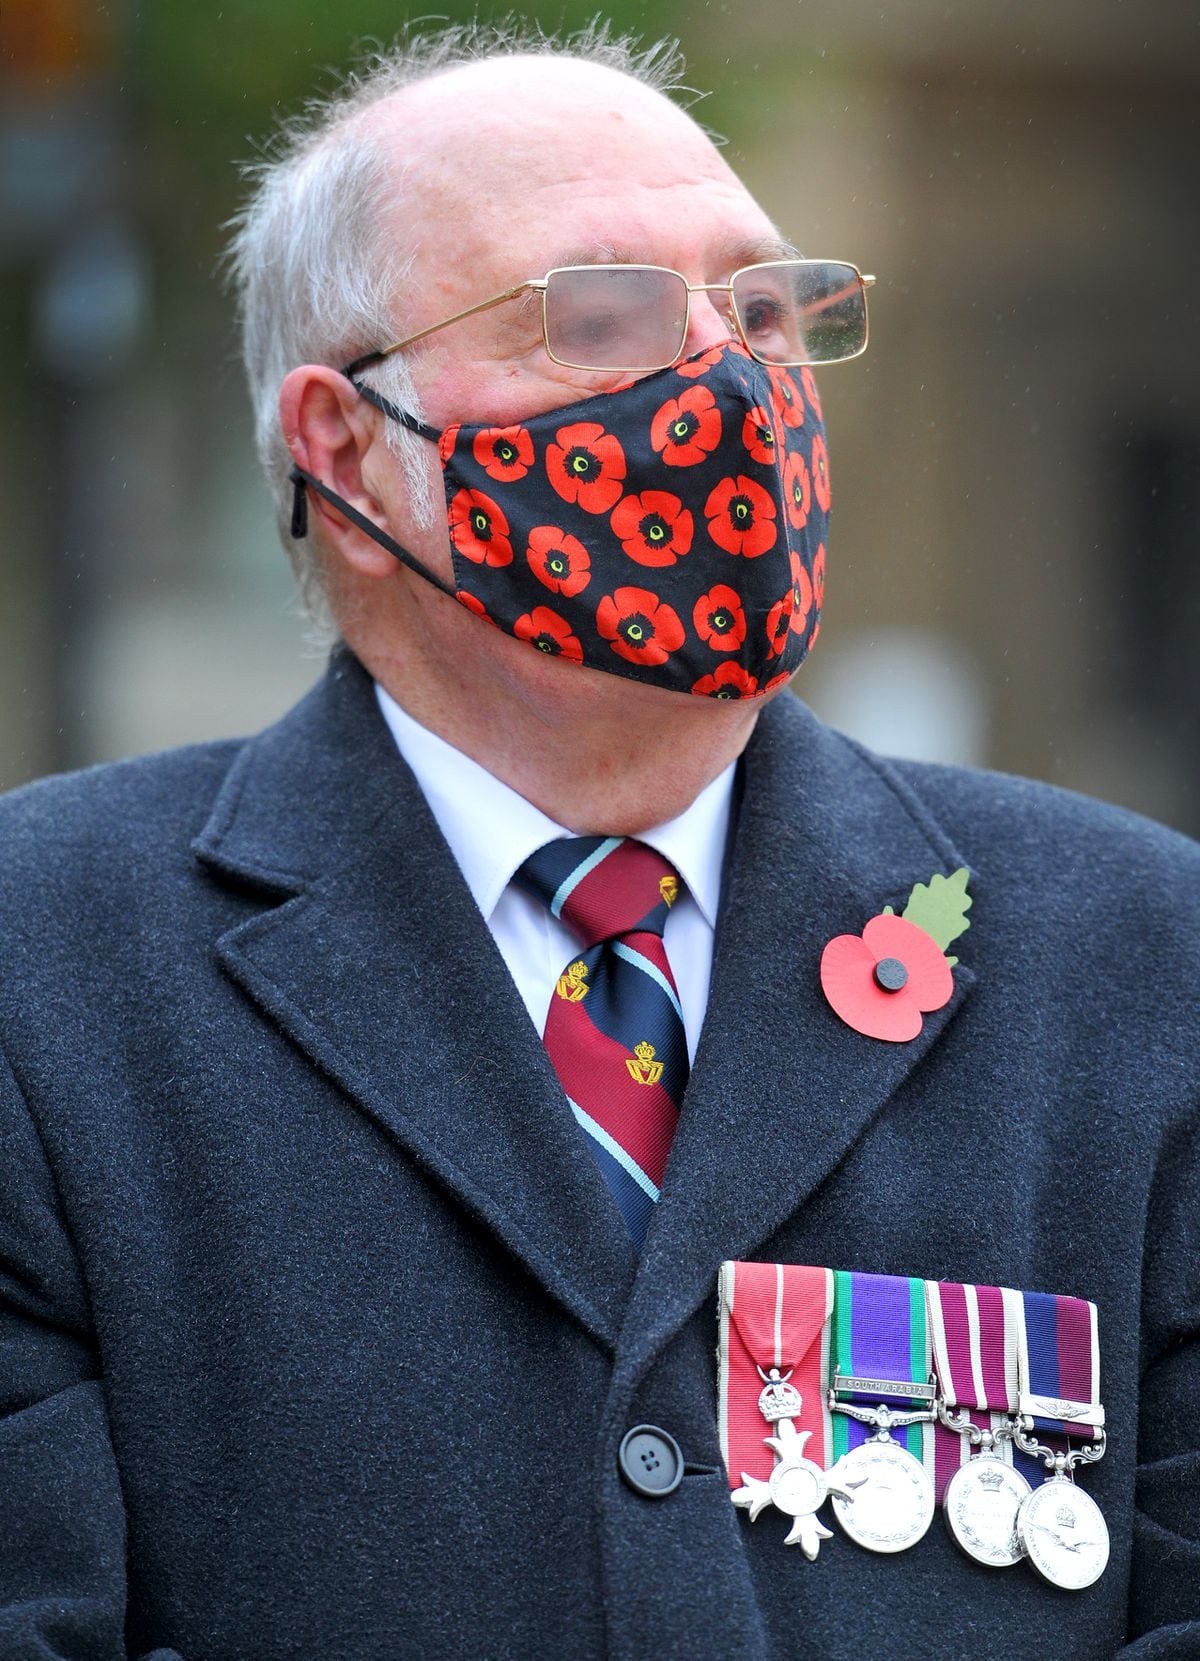 A poppy mask on show at the service in Stafford